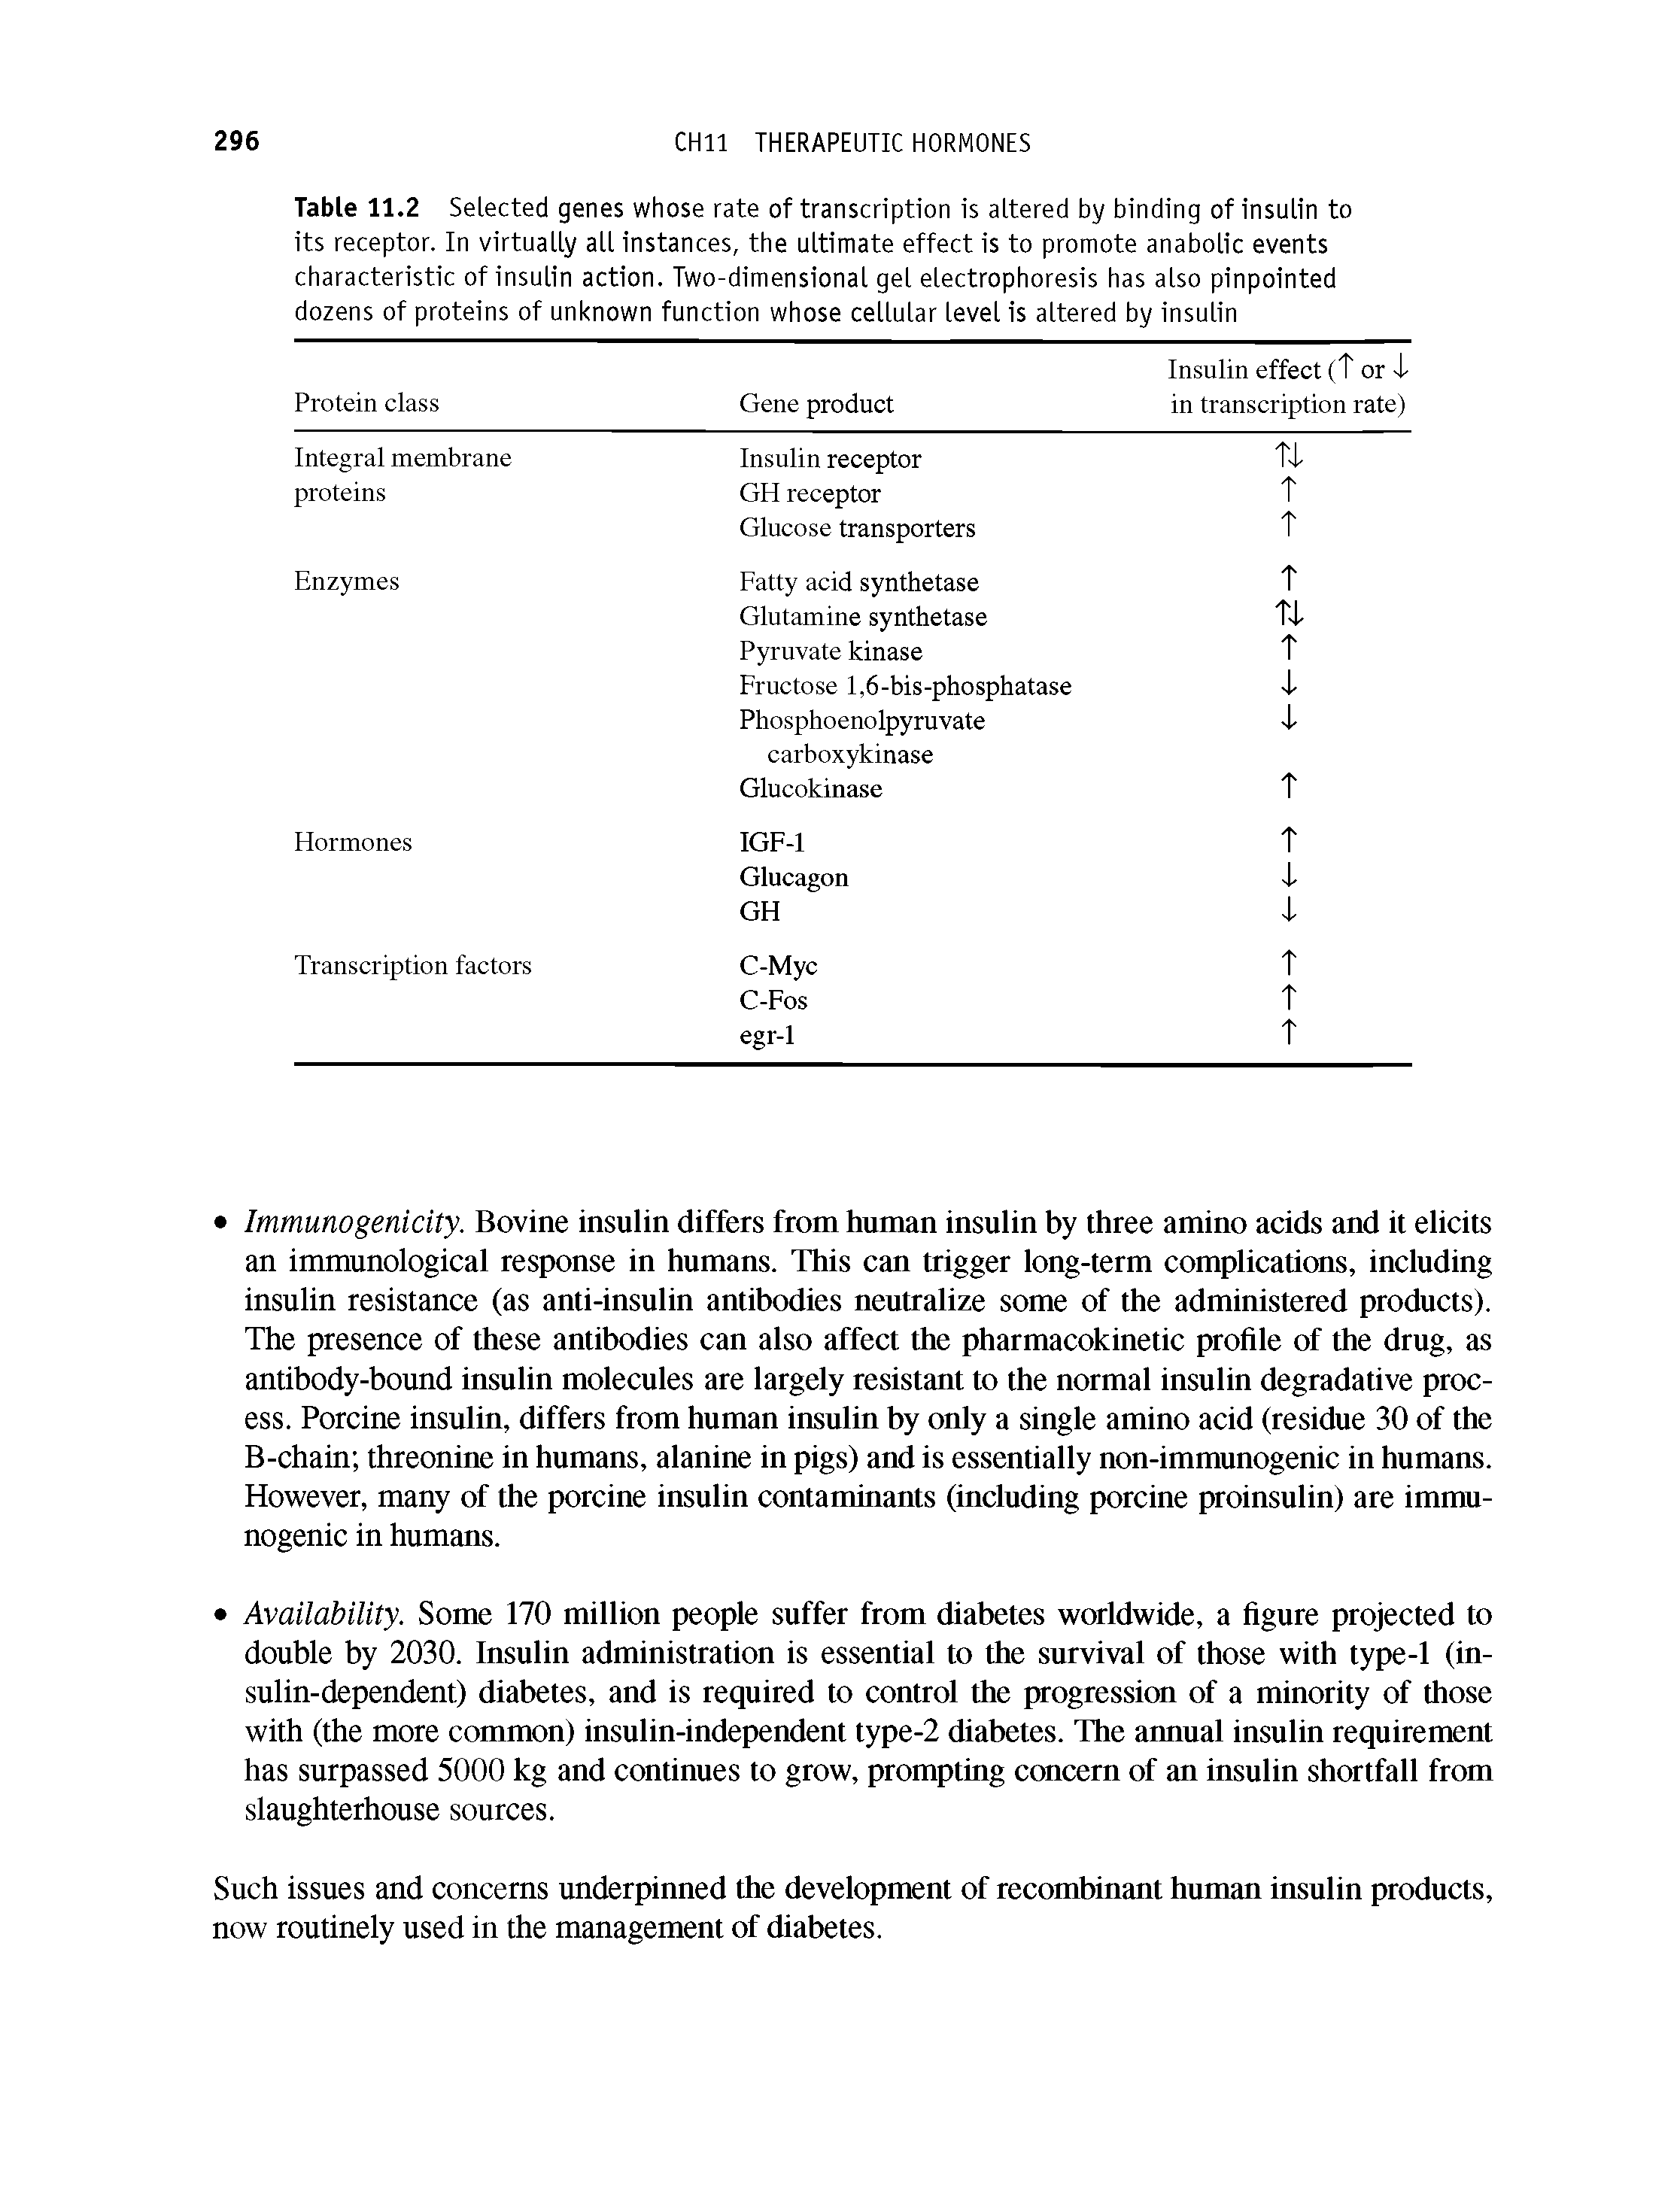 Table 11.2 Selected genes whose rate of transcription is altered by binding of insulin to its receptor. In virtually all instances, the ultimate effect is to promote anabolic events characteristic of insulin action. Two-dimensional gel electrophoresis has also pinpointed dozens of proteins of unknown function whose cellular level is altered by insulin...